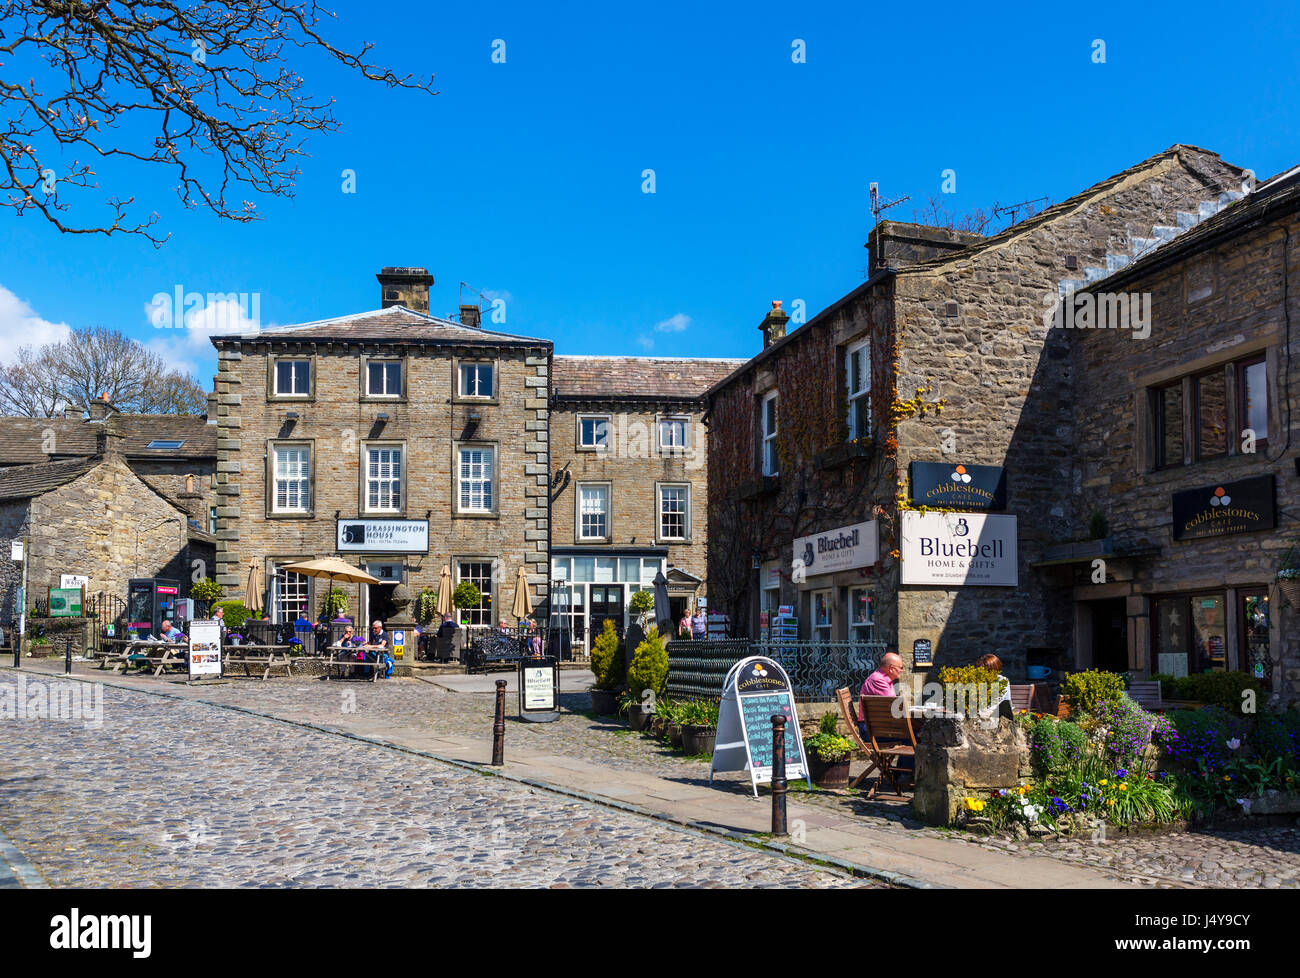 Cafe on The Square in the  traditional English village of Grassington, Wharfedale, Yorkshire Dales National Park, North Yorkshire, England, UK. Stock Photo